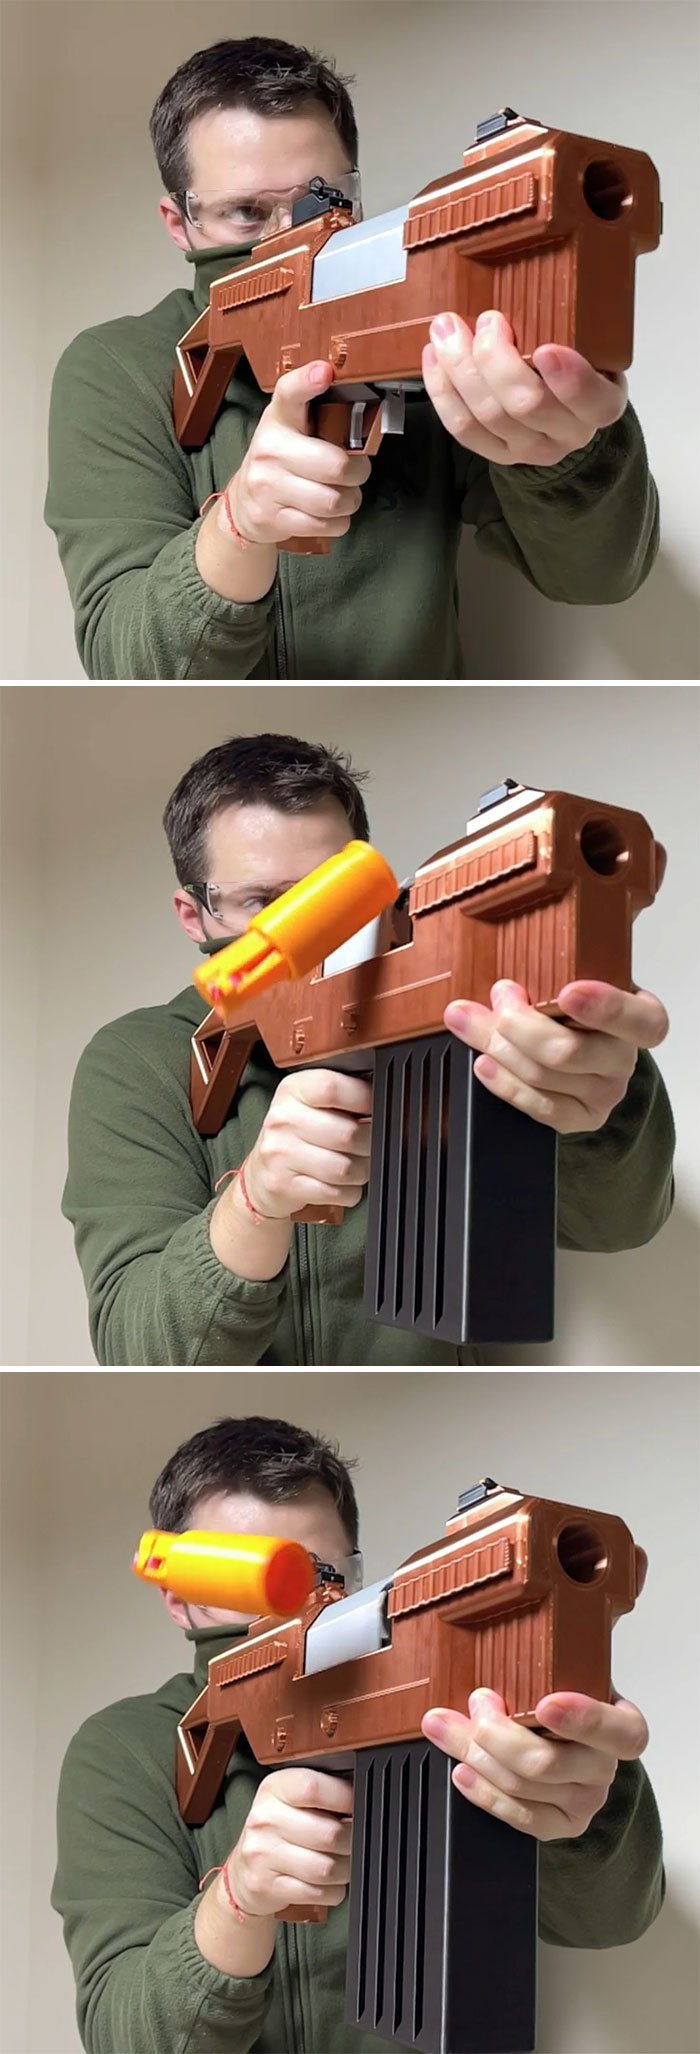 I Have Designed And Made Fully Mechanical (No Electronics) Shell Ejecting Foam Dart Blaster